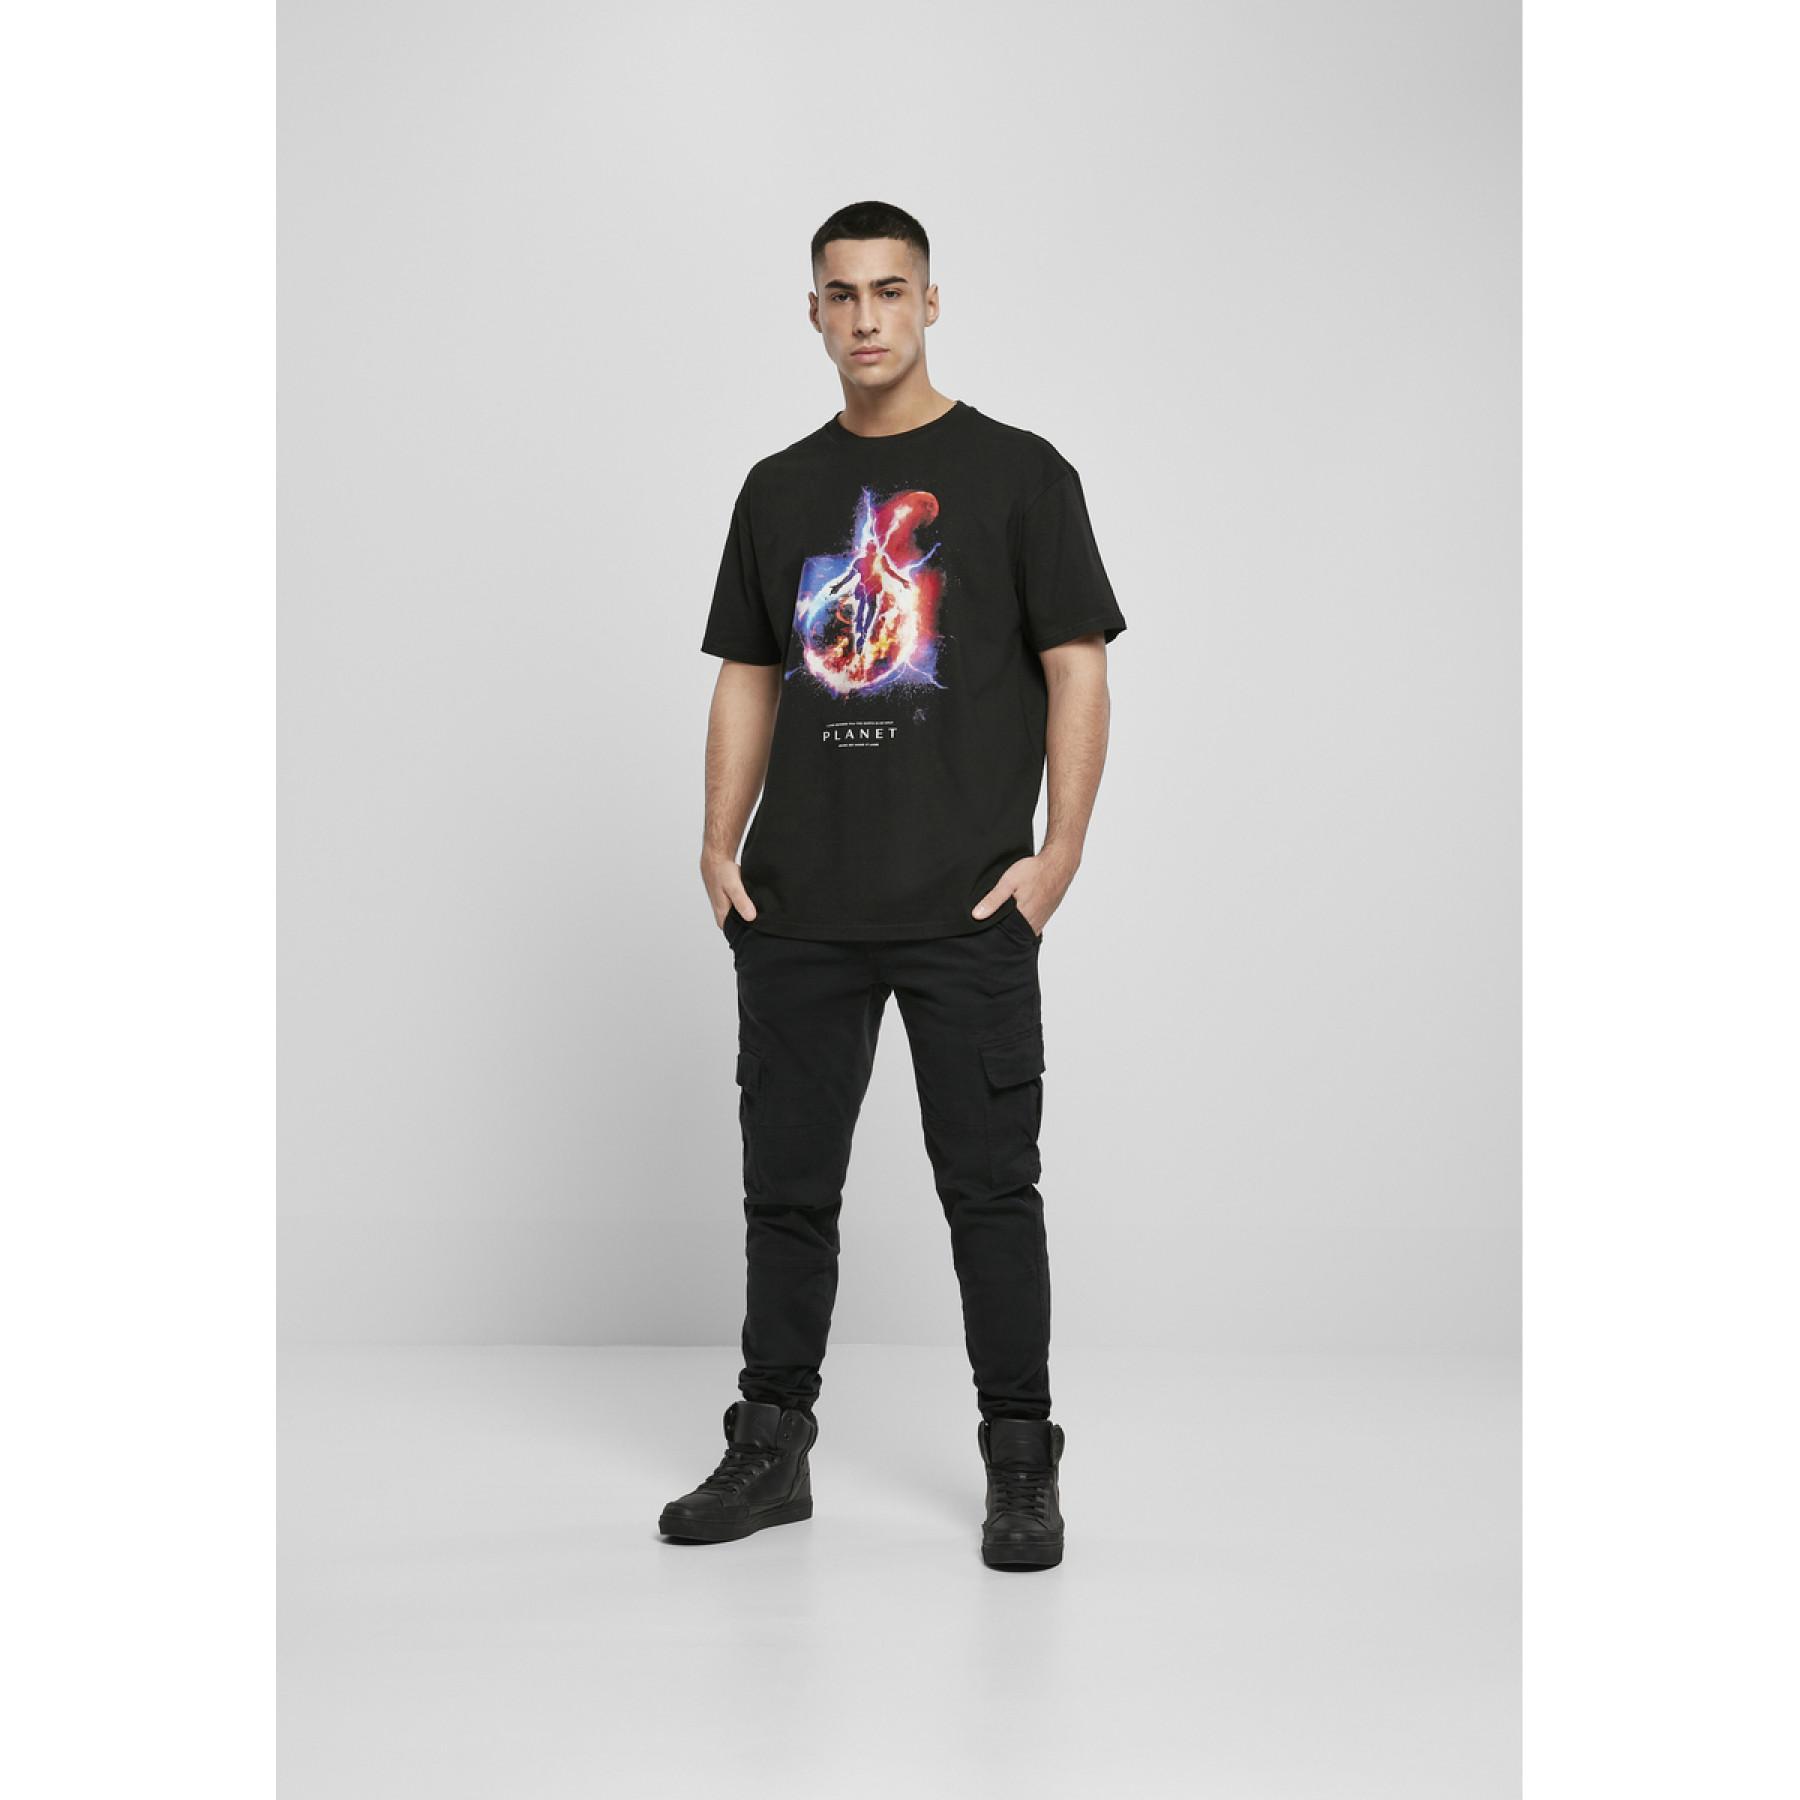 T-shirt Mister Tee Eat Lit Electric Planet oversize